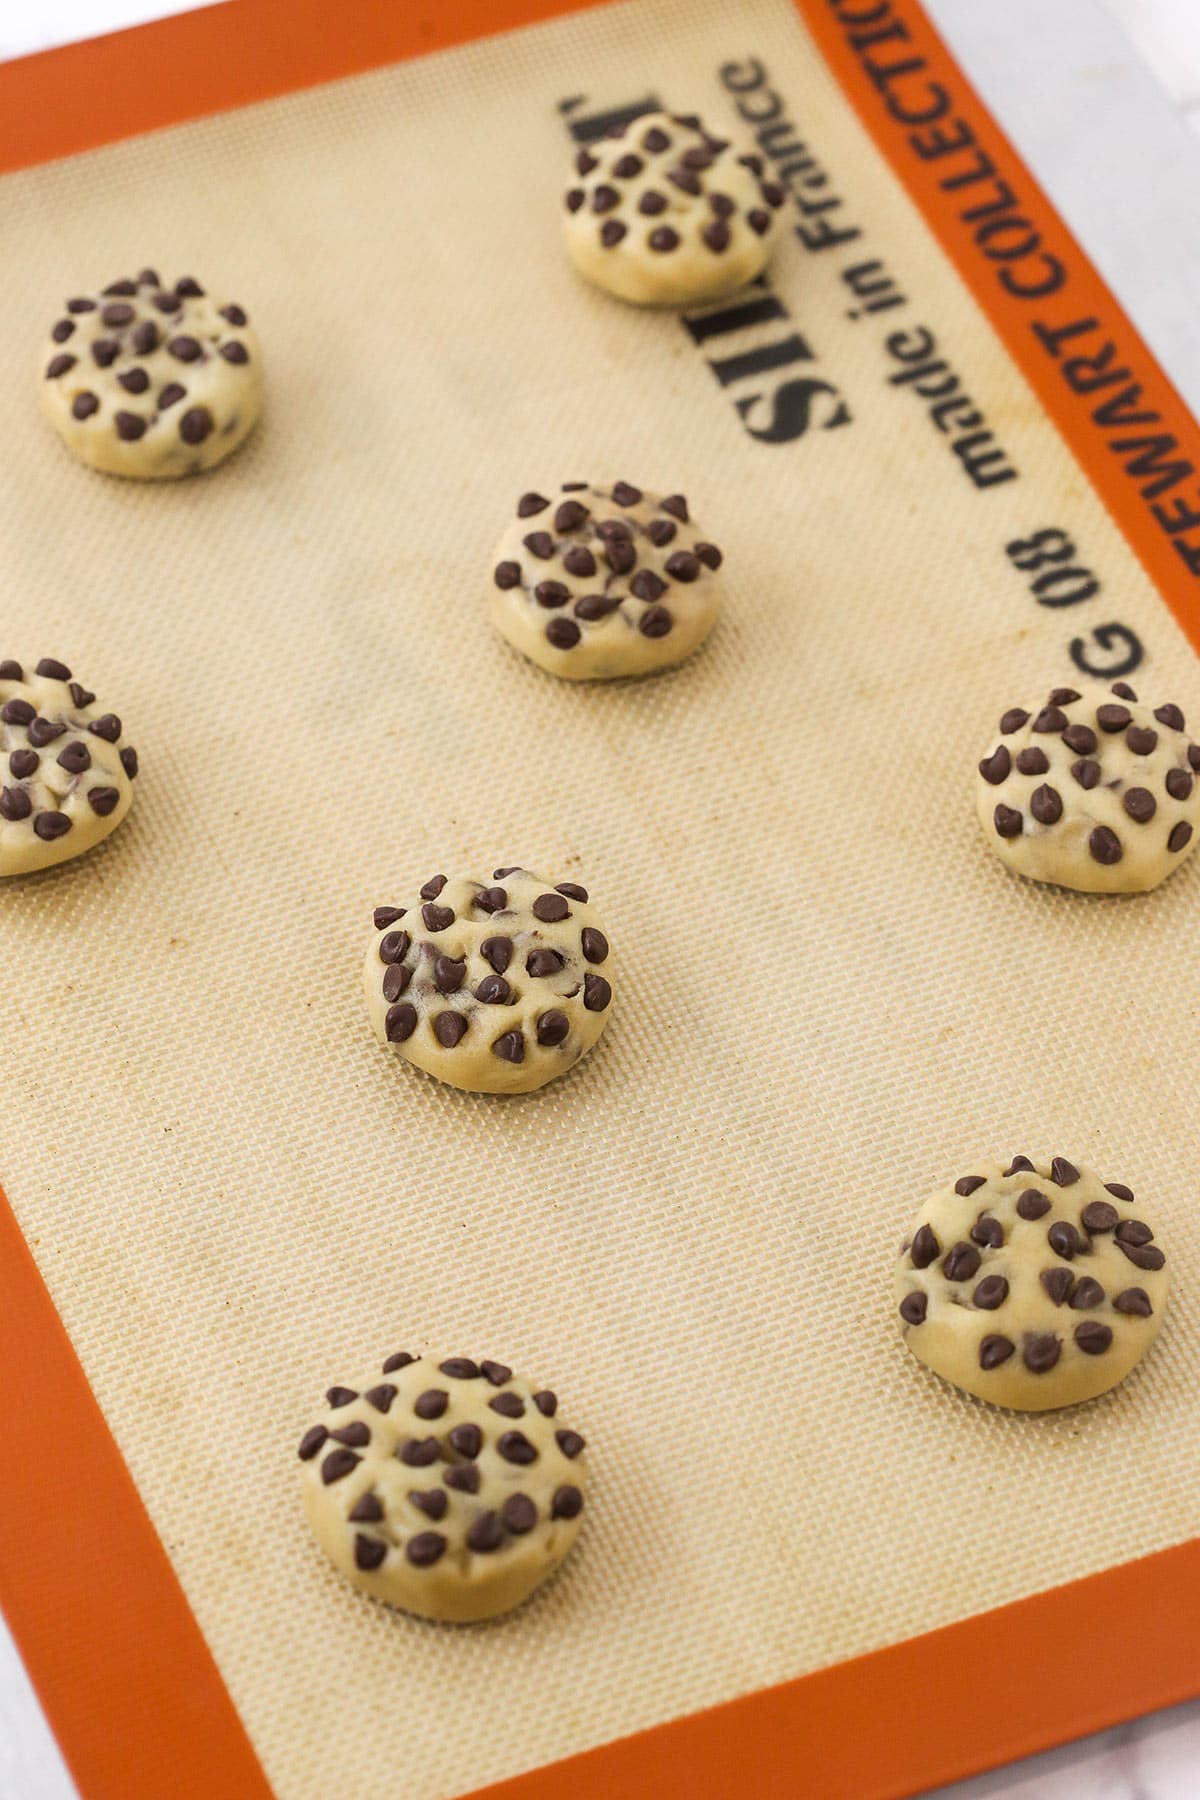 Eight balls of chocolate chip cookie dough on a lined cookie sheet with extra mini chocolate chips pressed into each one